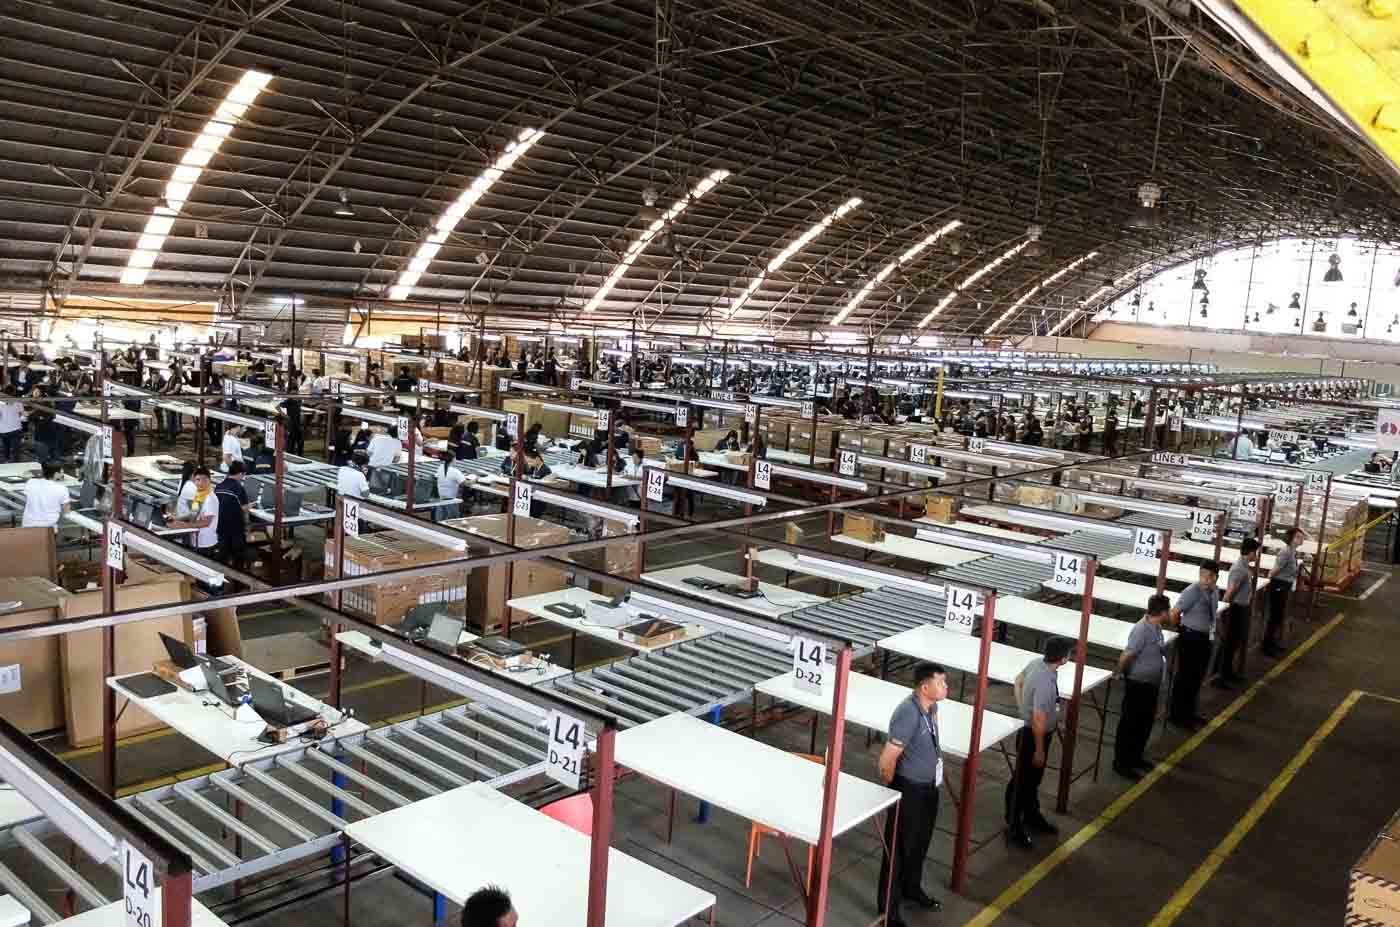 IN PHOTOS: Comelec’s voting machines warehouse in Laguna